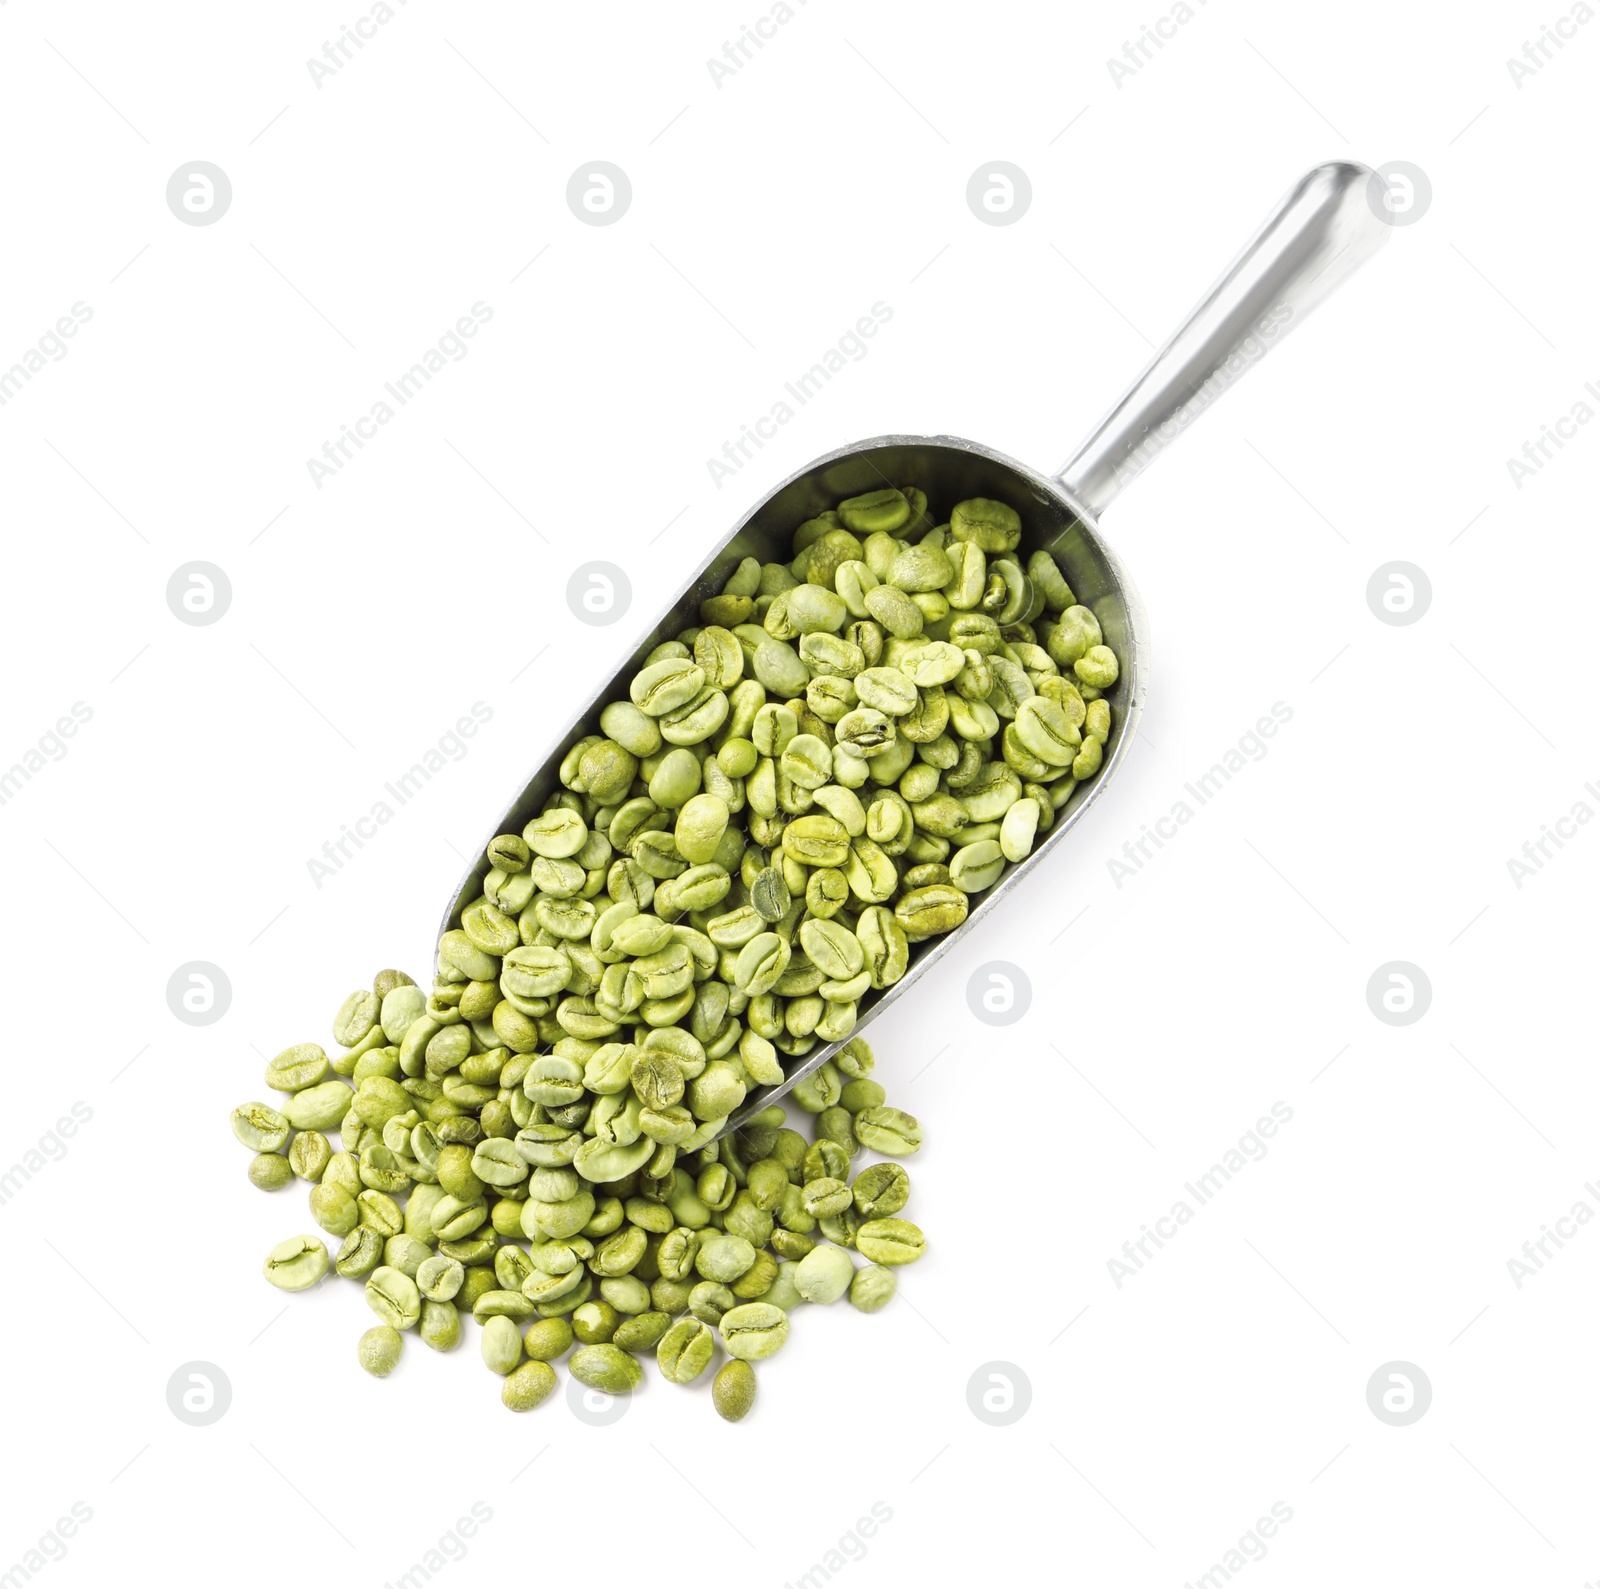 Photo of Pile of green coffee beans and scoop on white background